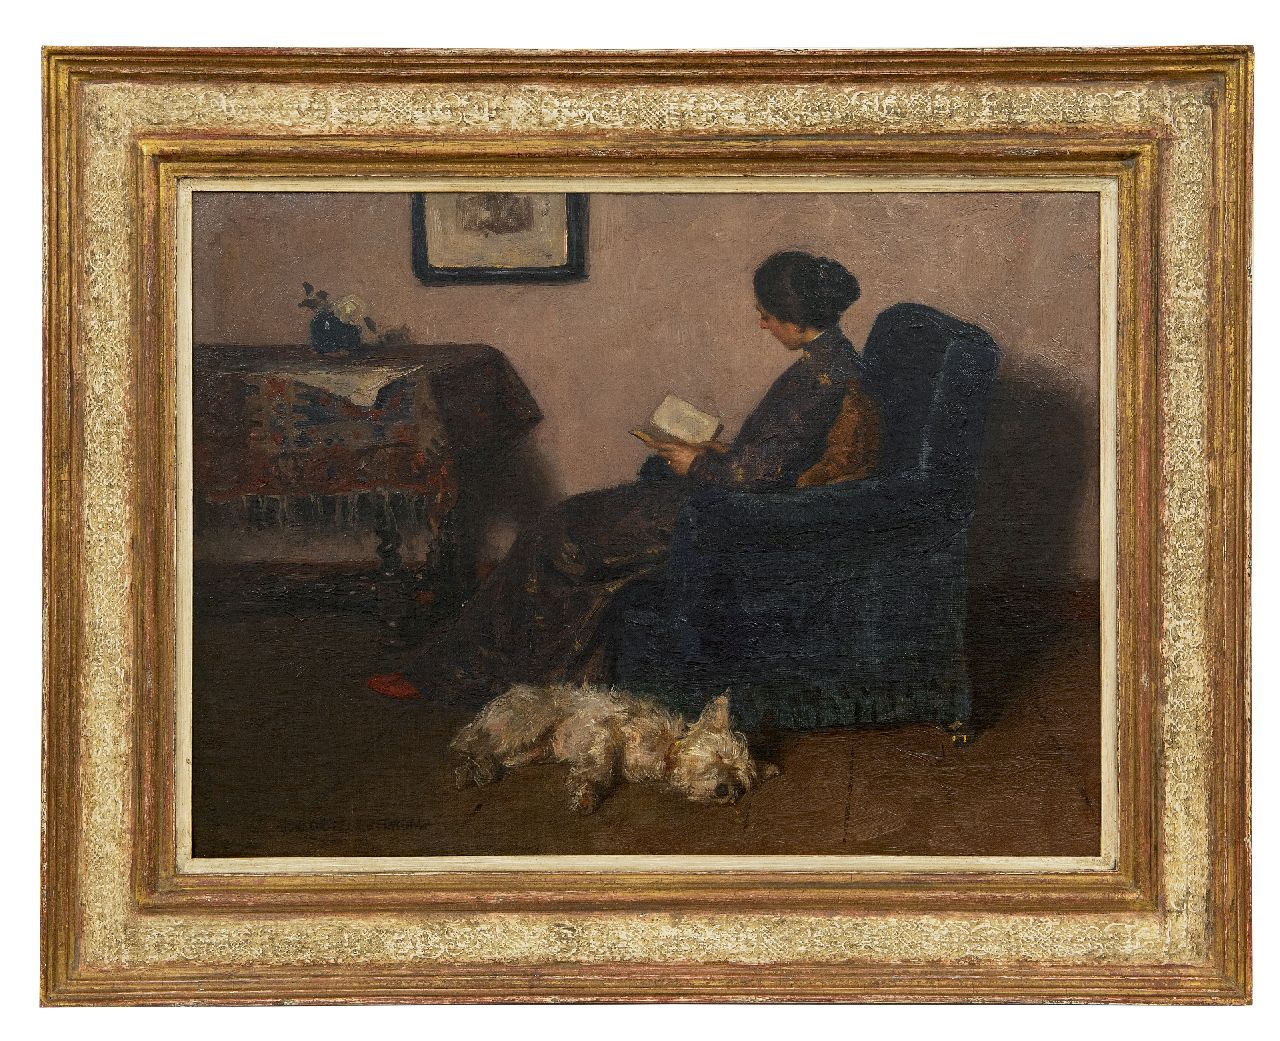 Zoetelief Tromp J.  | Johannes 'Jan' Zoetelief Tromp | Paintings offered for sale | The painter's wife reading, with their dog Billie, oil on canvas 41.5 x 55.5 cm, signed l.l.